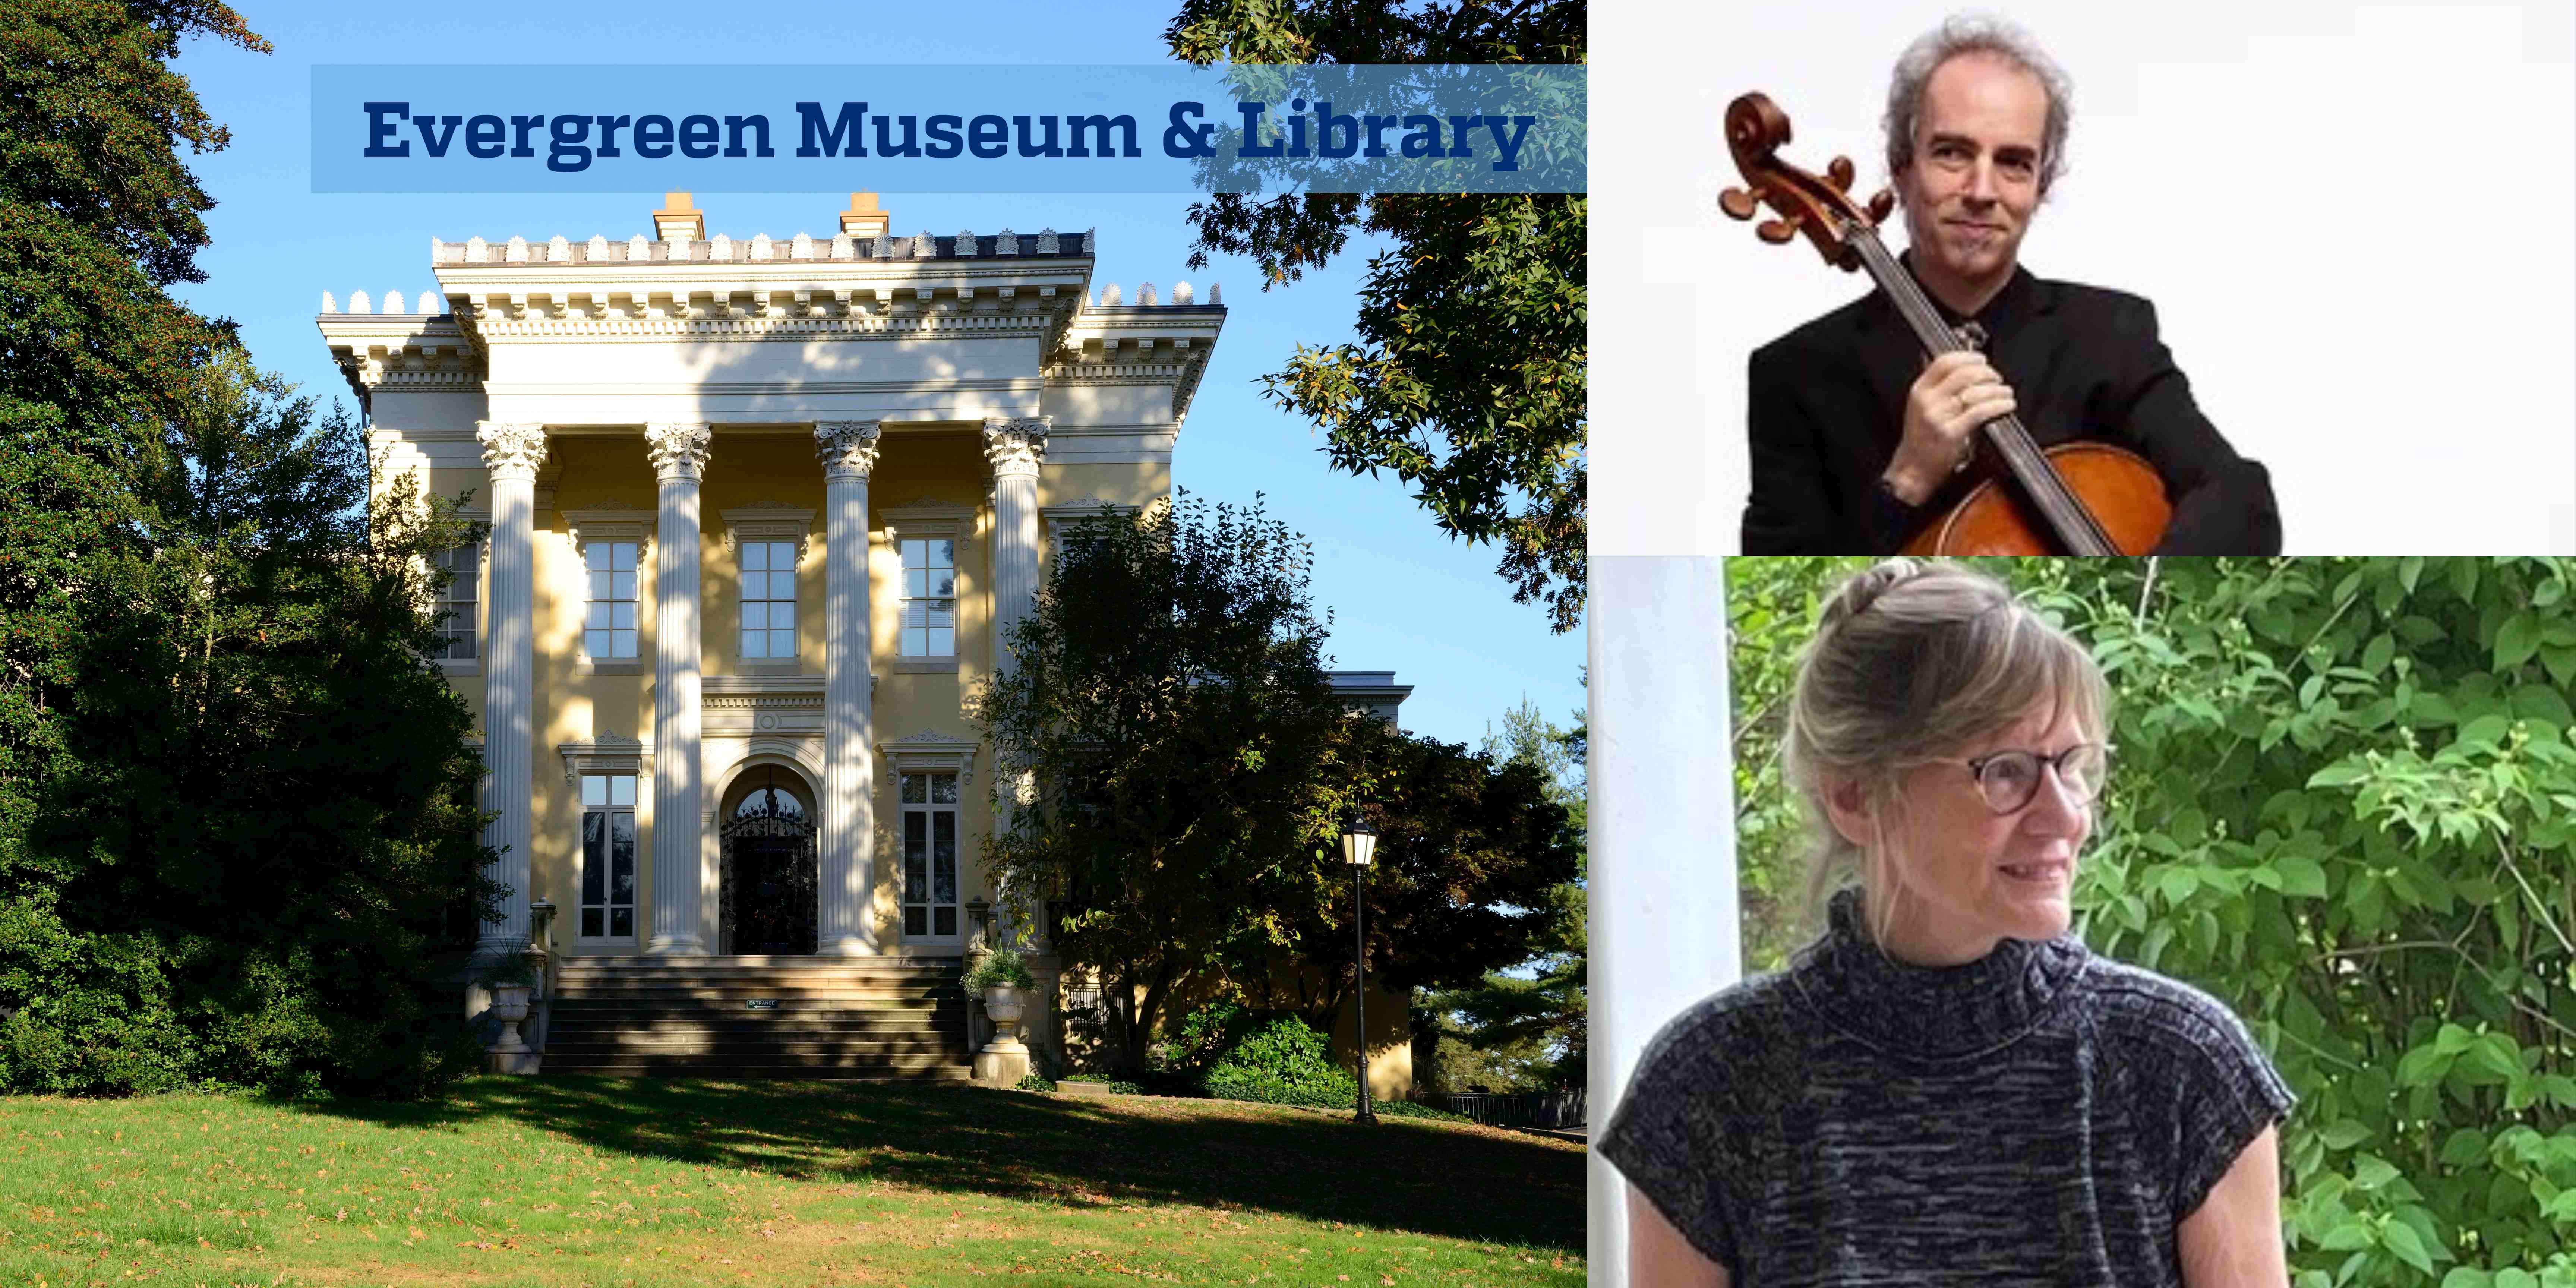 image of Judith Krummeck and John Moran, and Evergreen Museum & Library